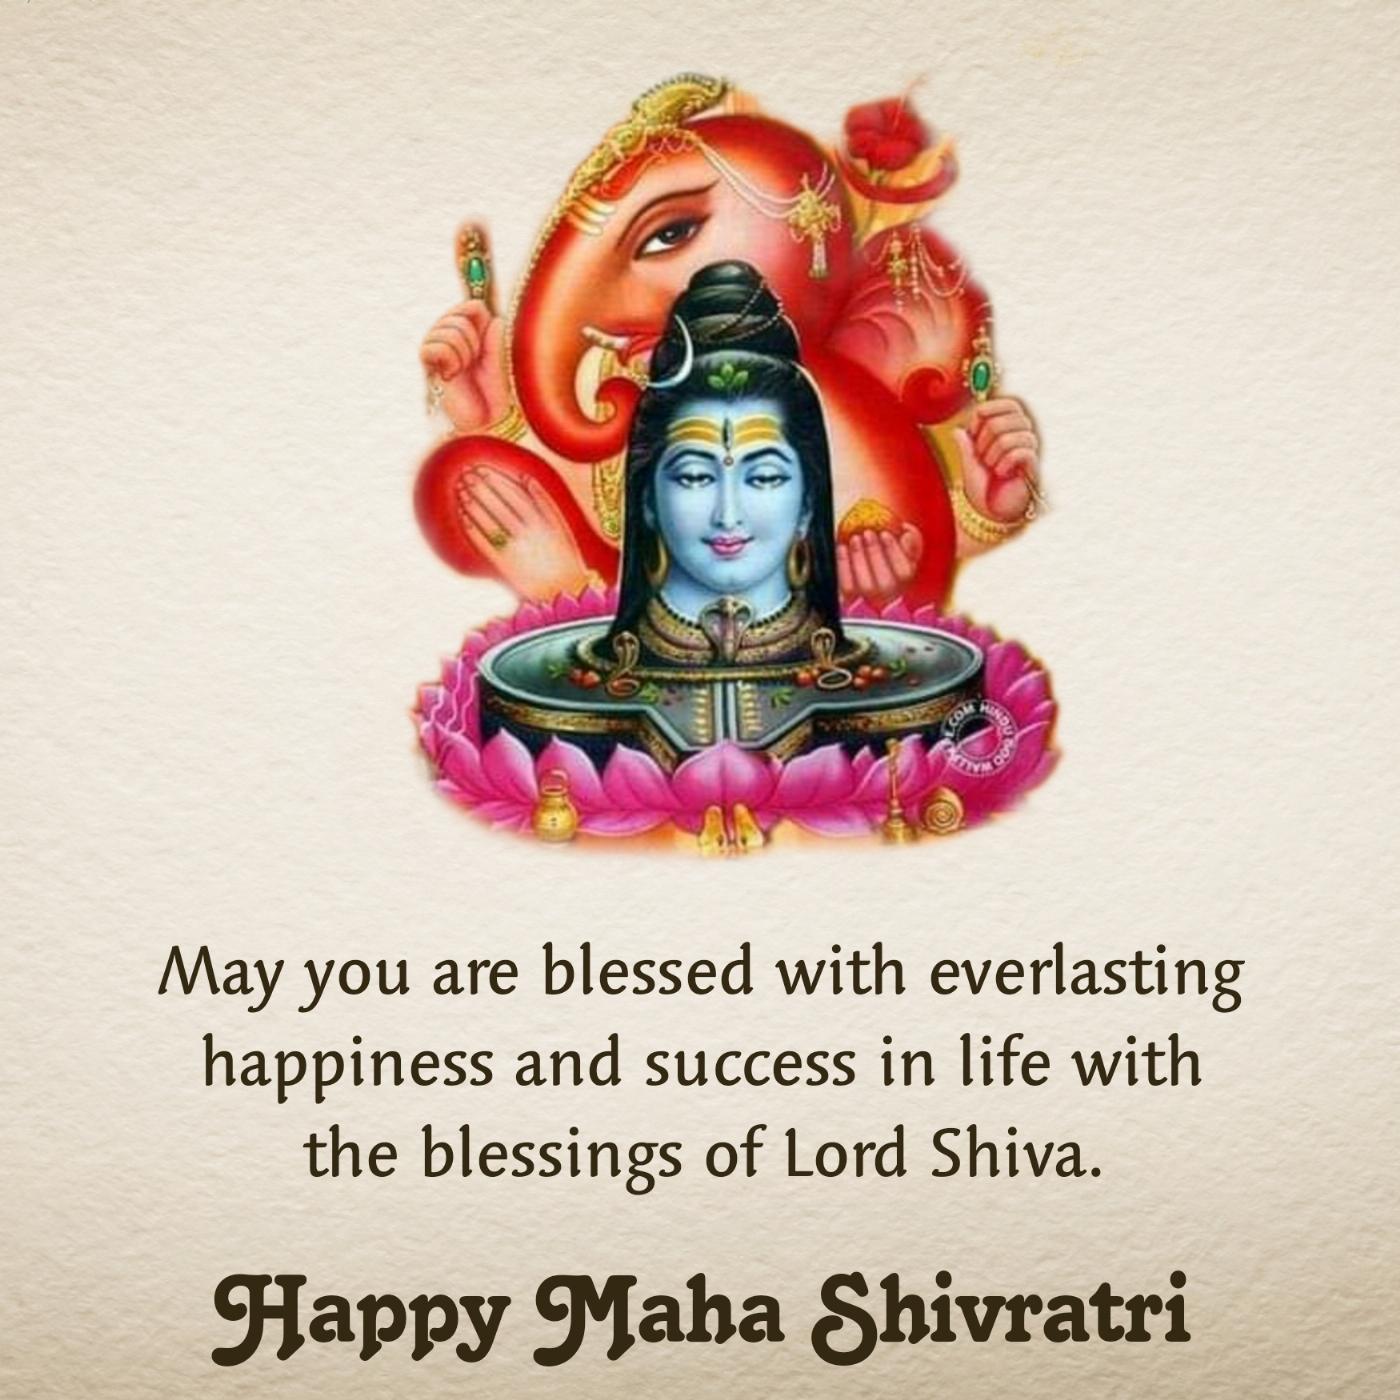 May you are blessed with everlasting happiness and success in life